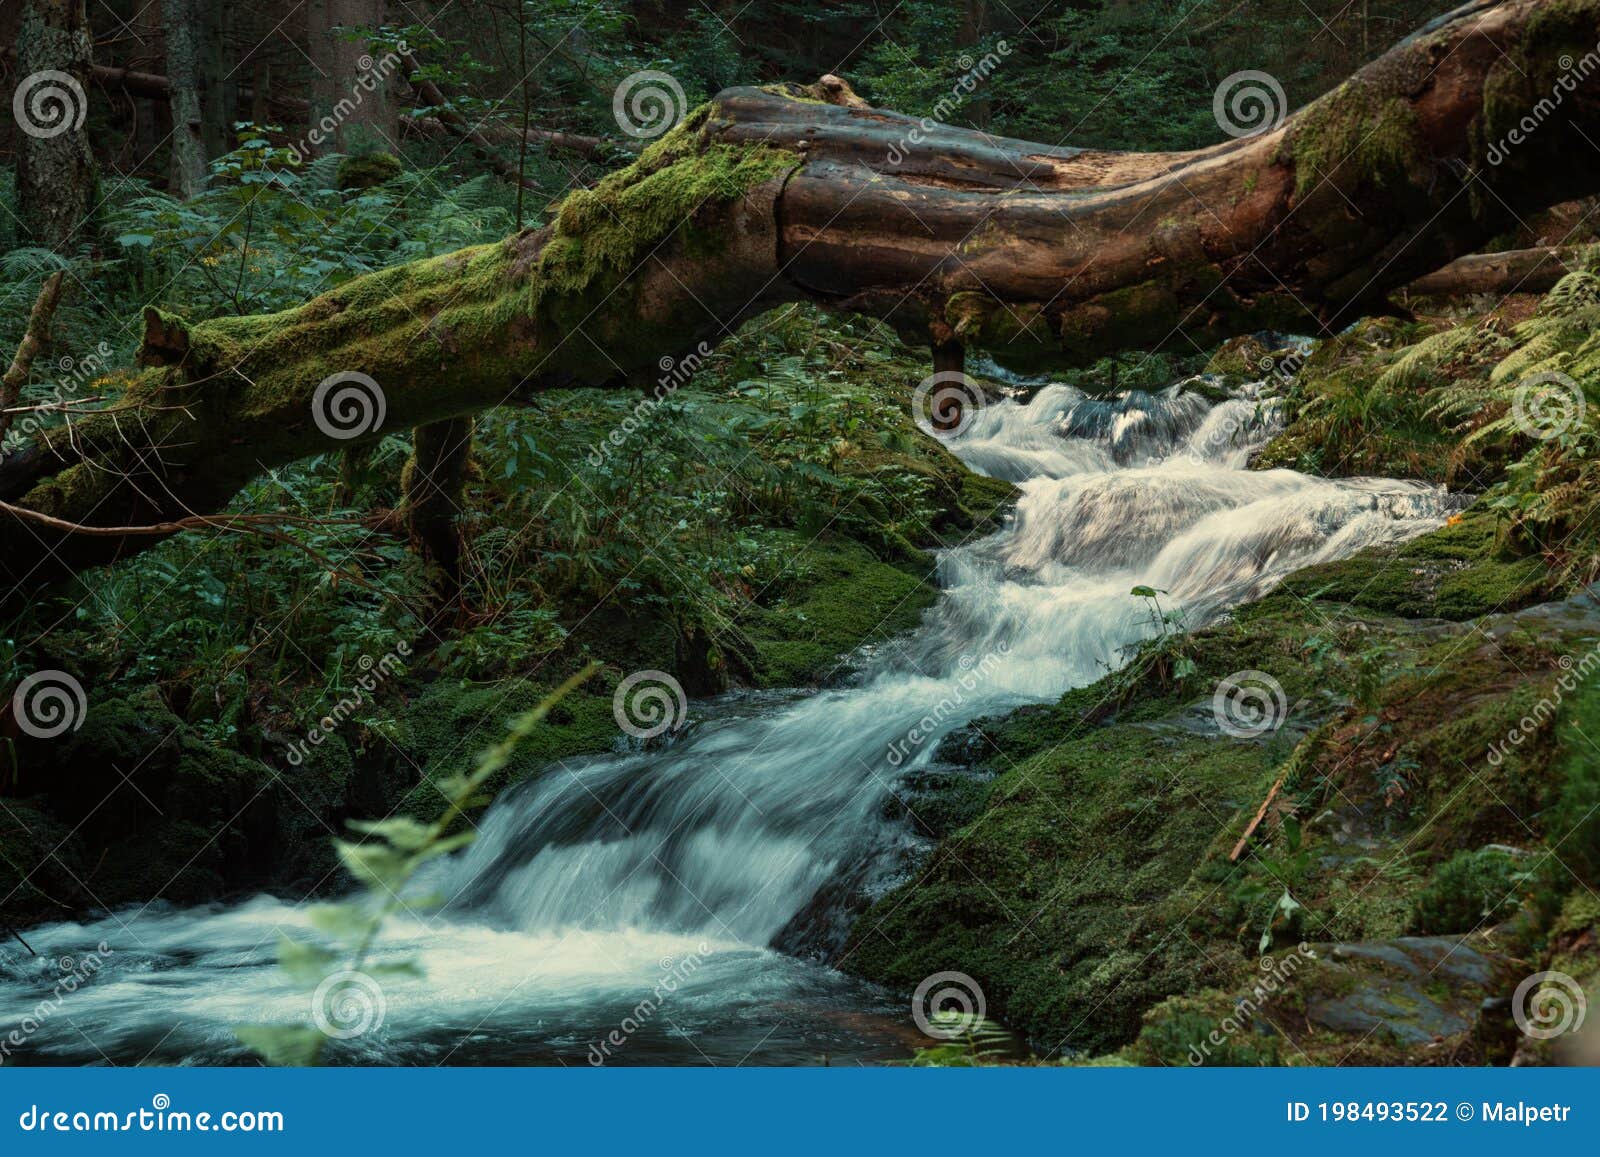 Wild Cascade River Situated In Cold Evening Forest Mountain Environment